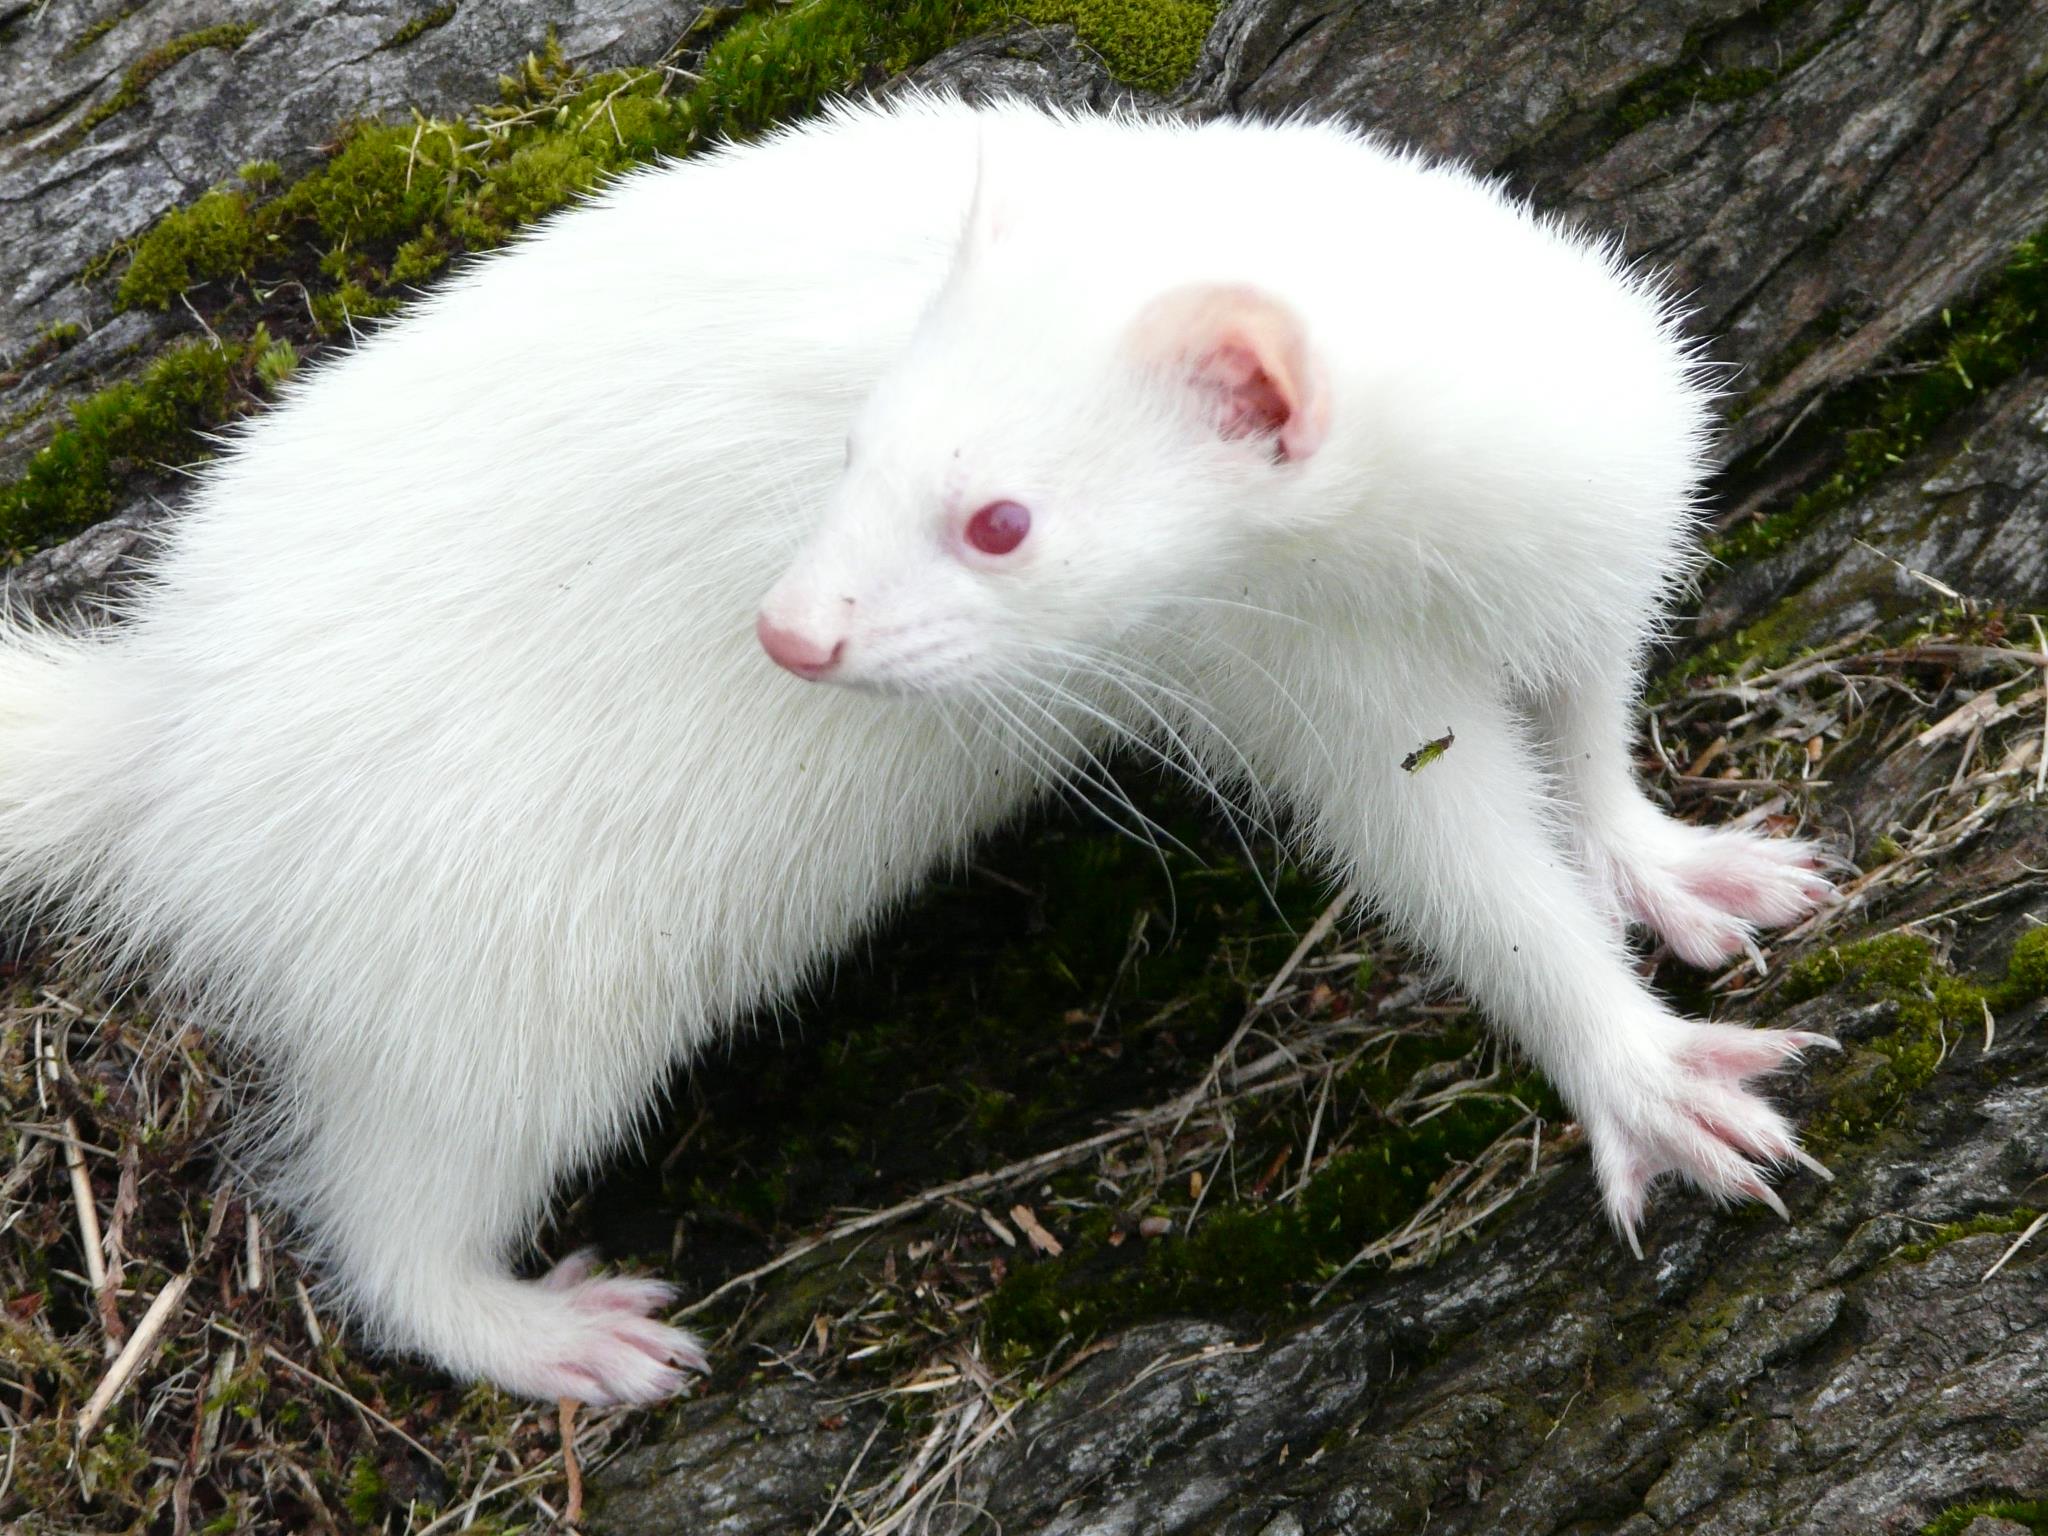 Why do albino animals have red eyes? – How It Works